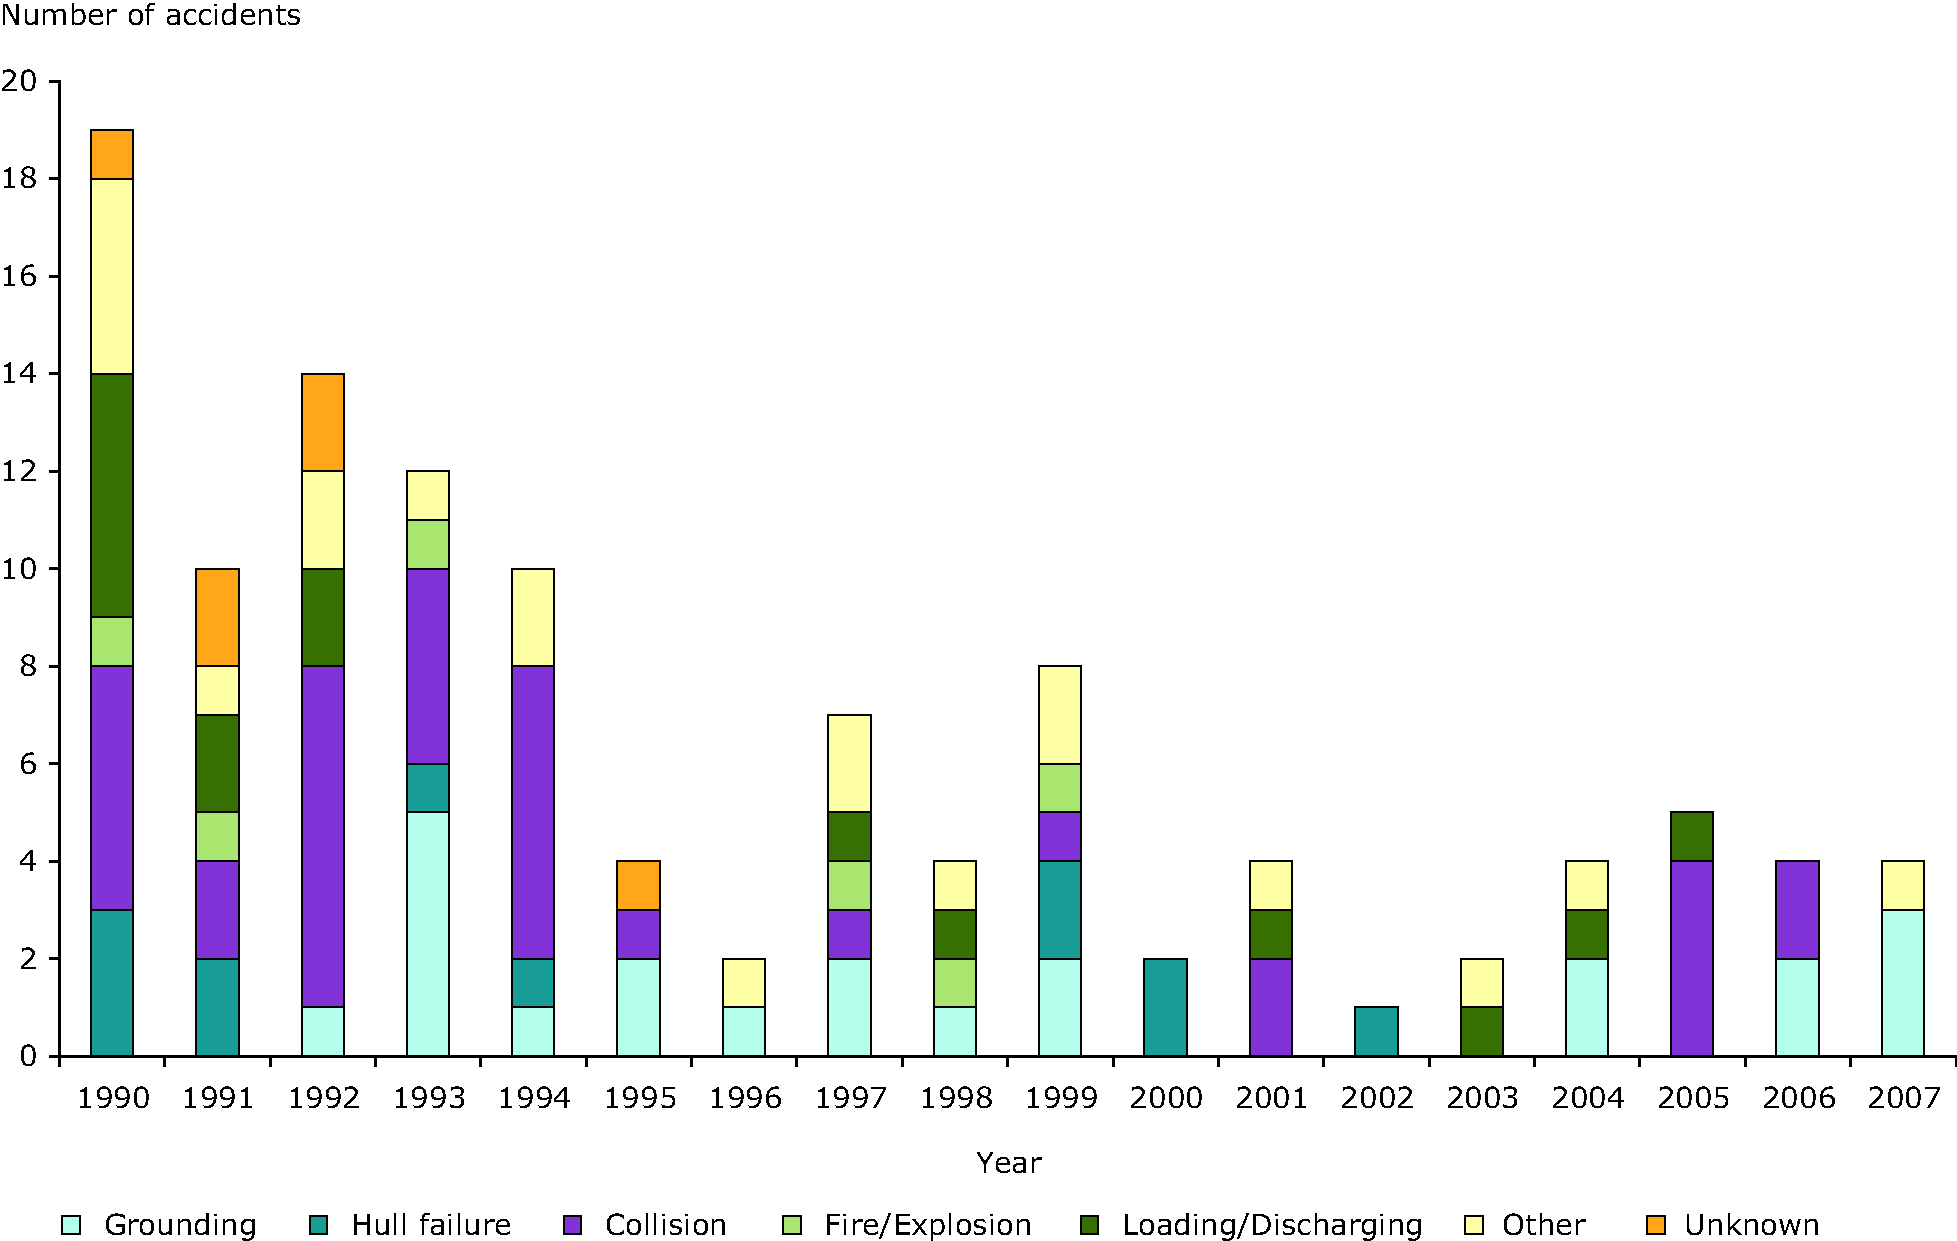 Number of tanker accidents (>7 tonnes oil spilt) in European waters and cause from 1990 - 2007